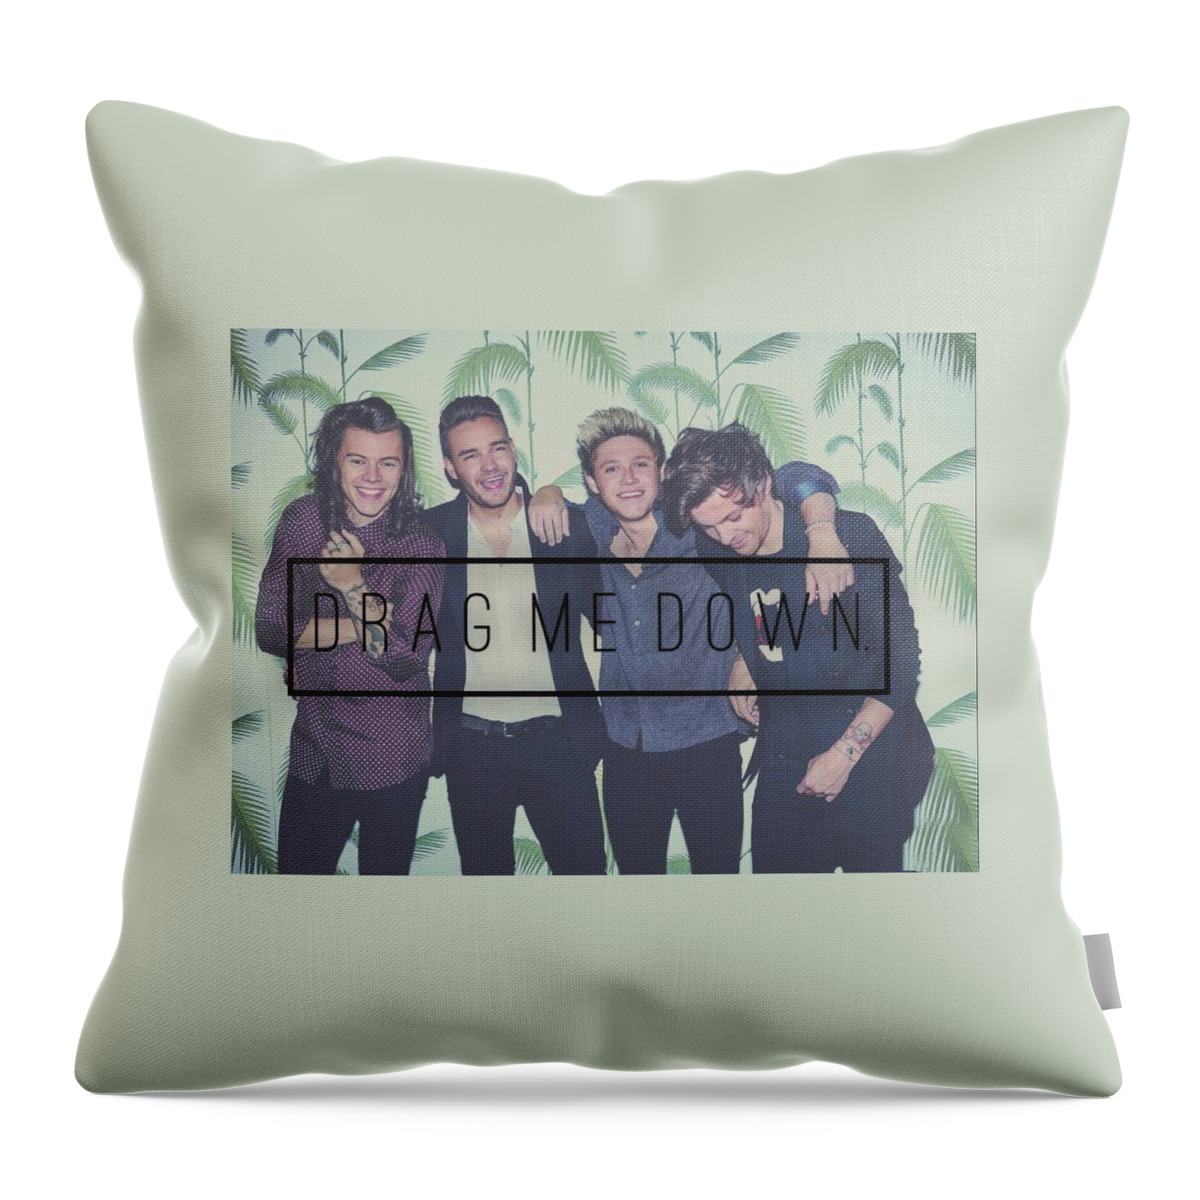 Drag Me Down - One Direction Throw Pillow by Alexis Casey - Mobile